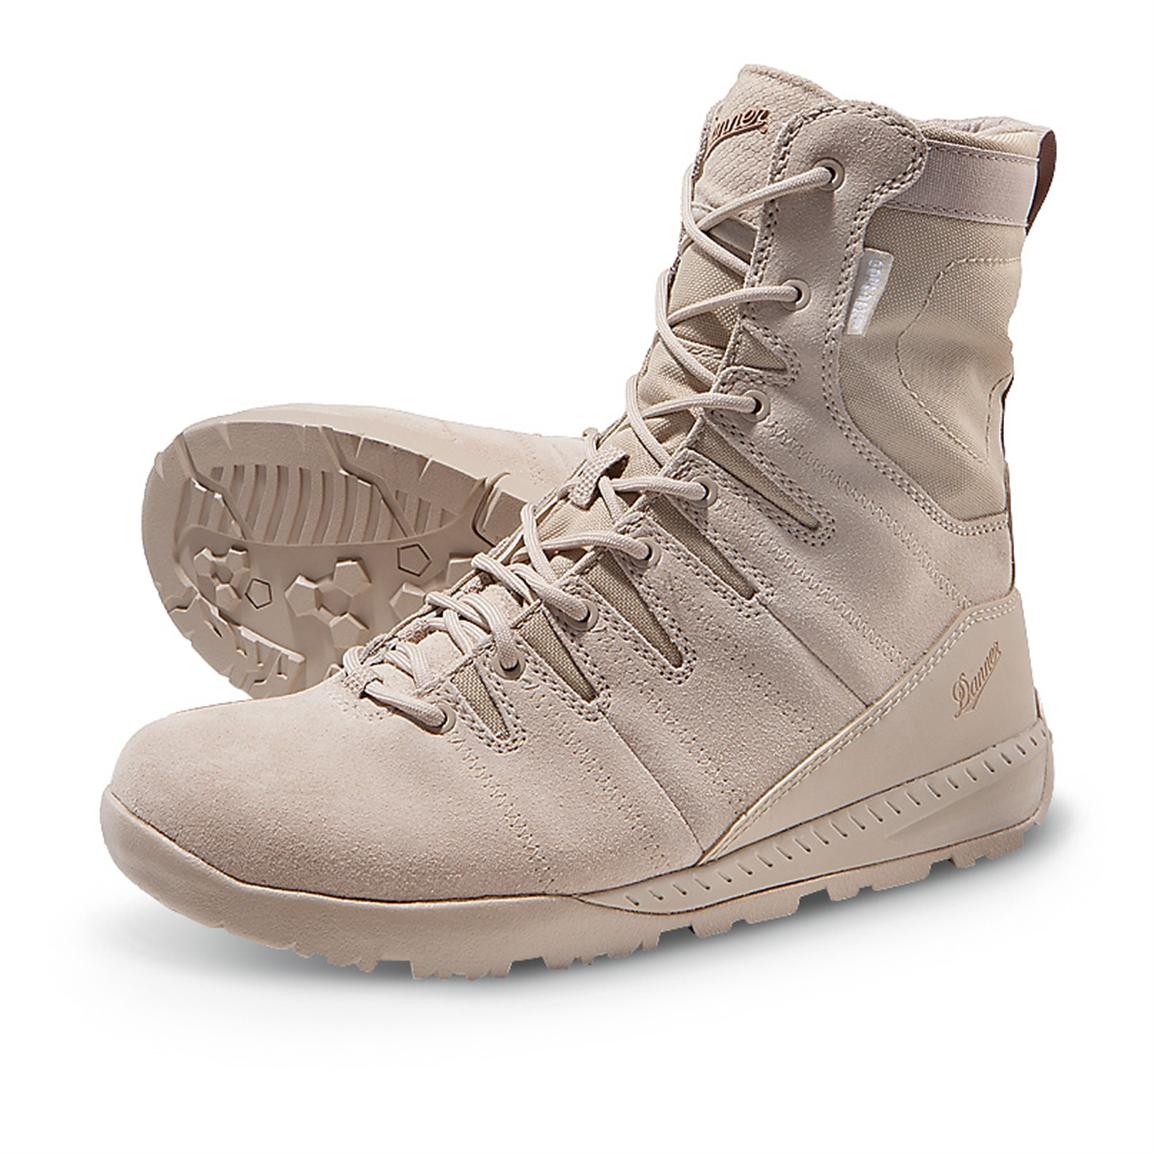 Men's Danner Melee GORE-TEX Military-style Tactical Boots, Tan ...